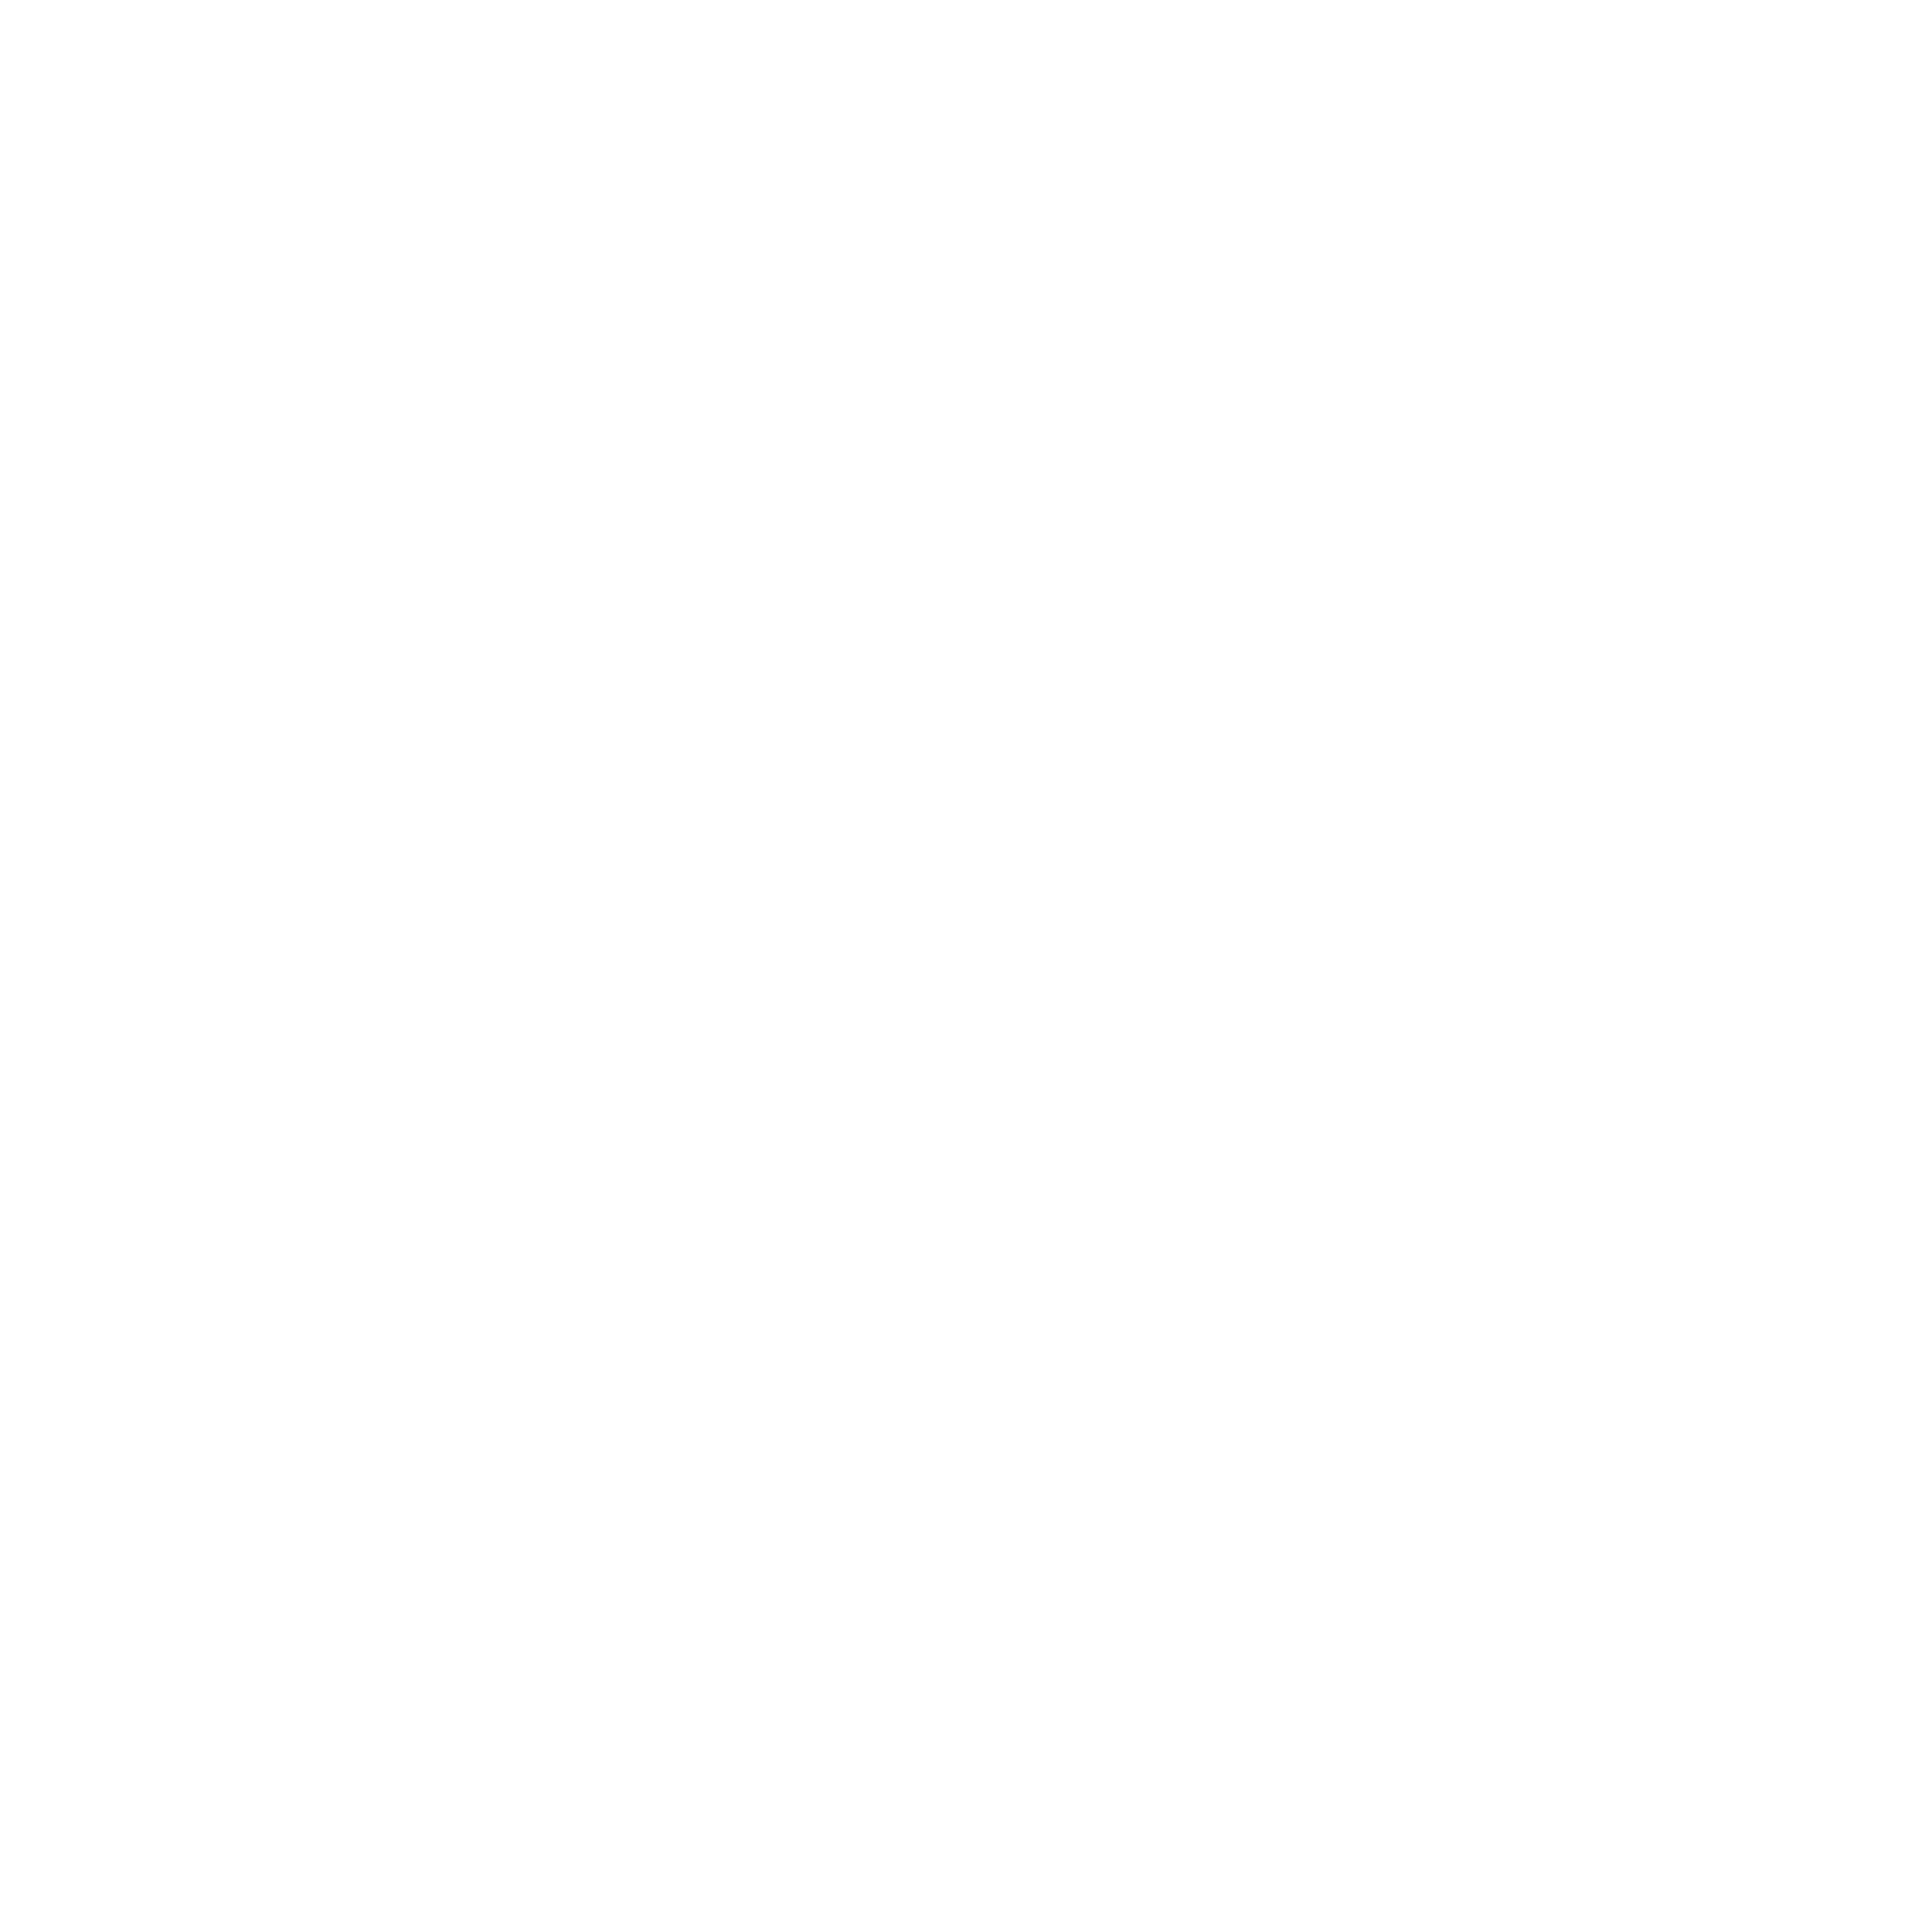 Earn an Executive Coaching Certification through Collective Leadership Assessment Certification